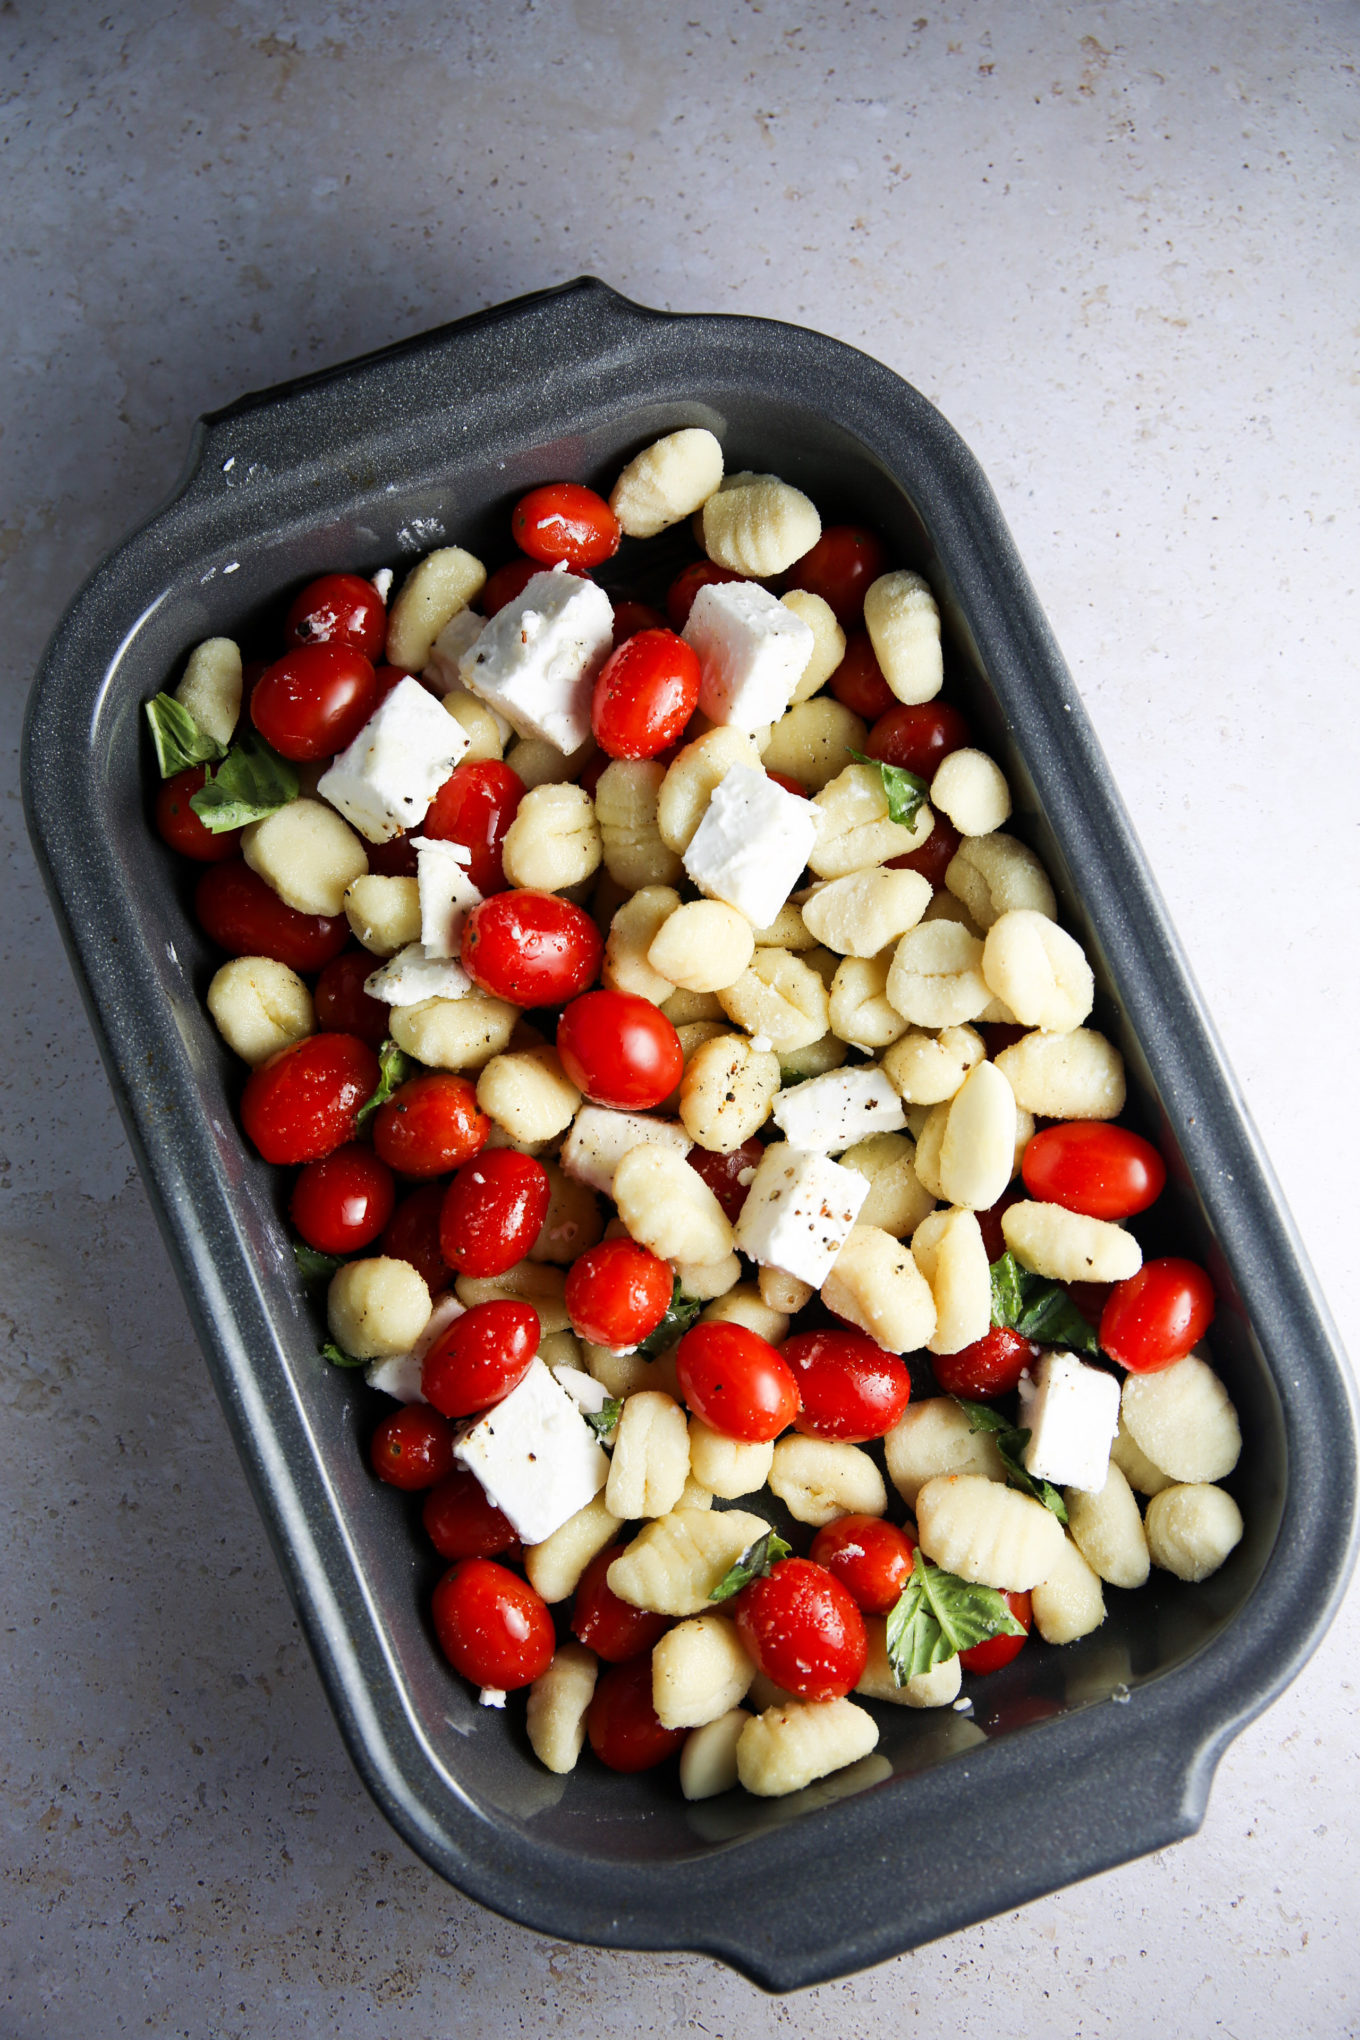 A baked dish filled with cherry tomatoes and feta cheese.